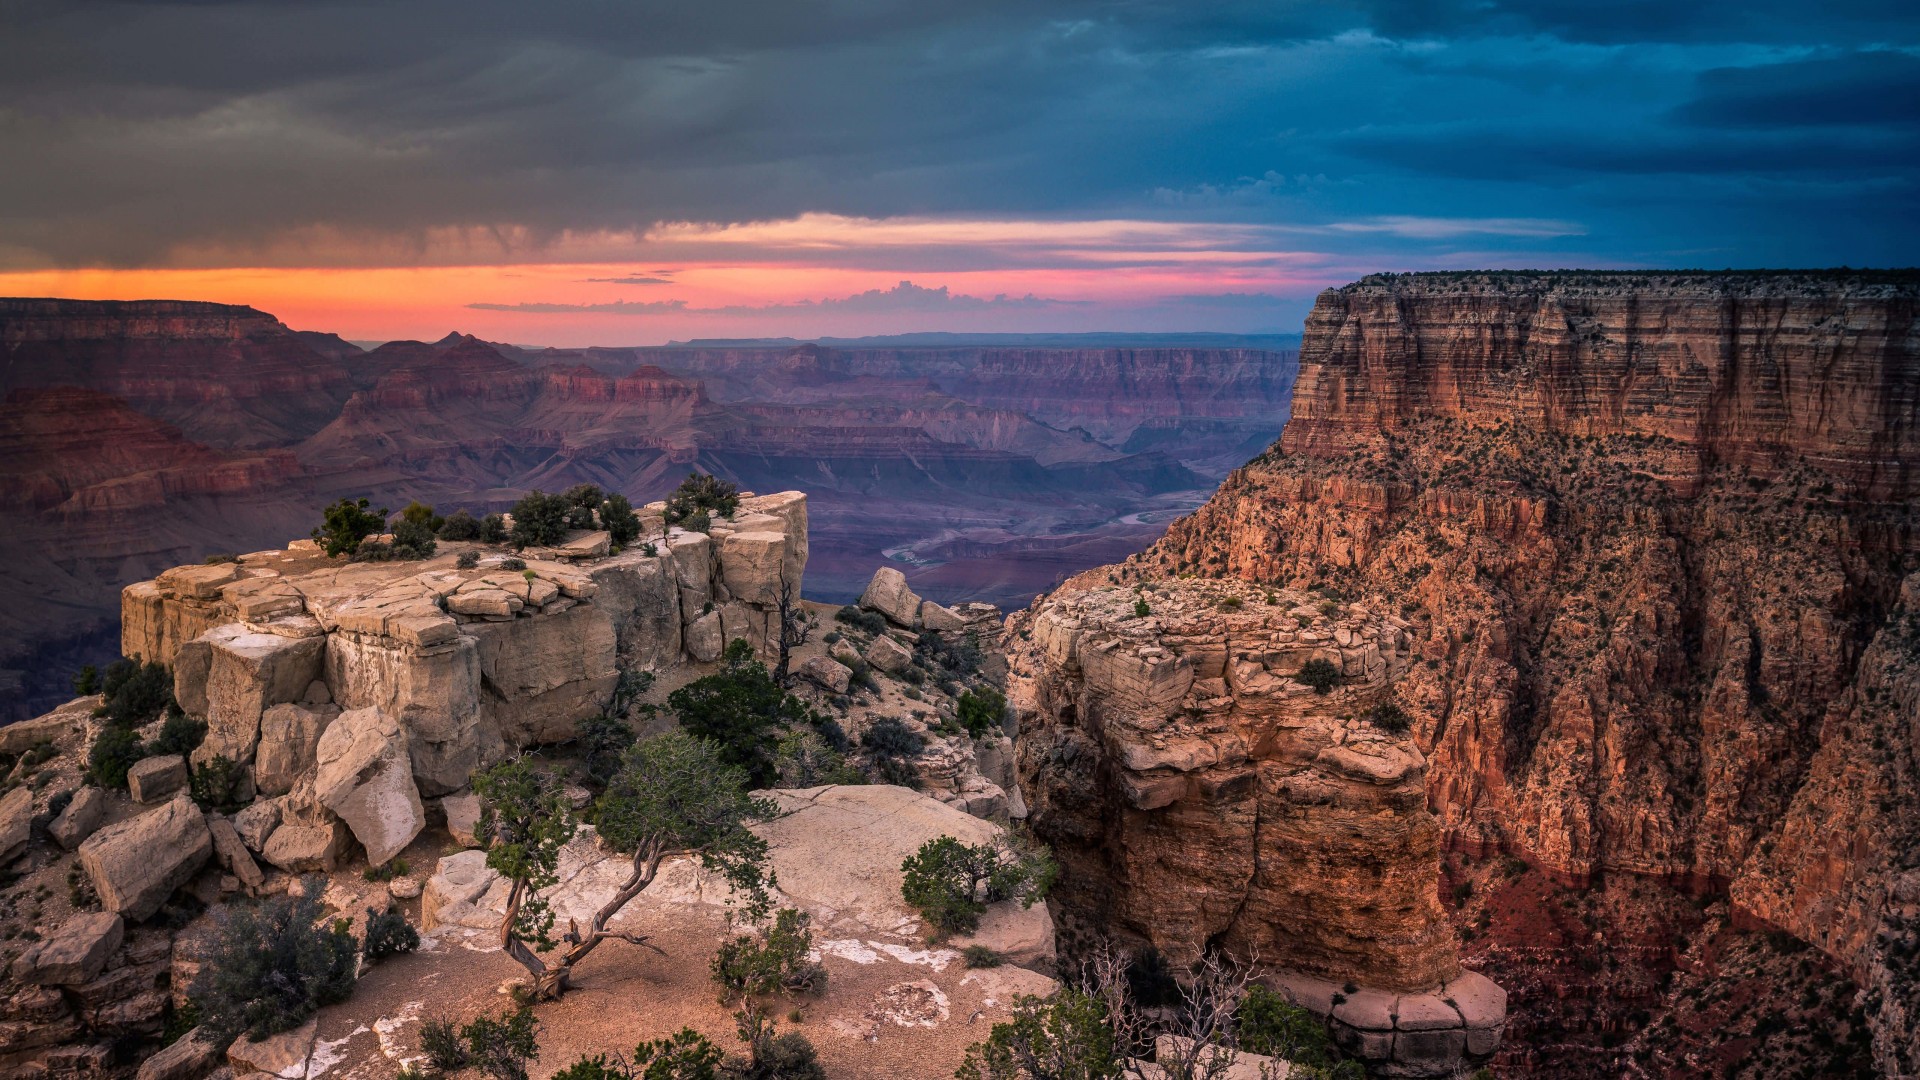 Sunset At The Grand Canyon Wallpaper for Desktop 1920x1080